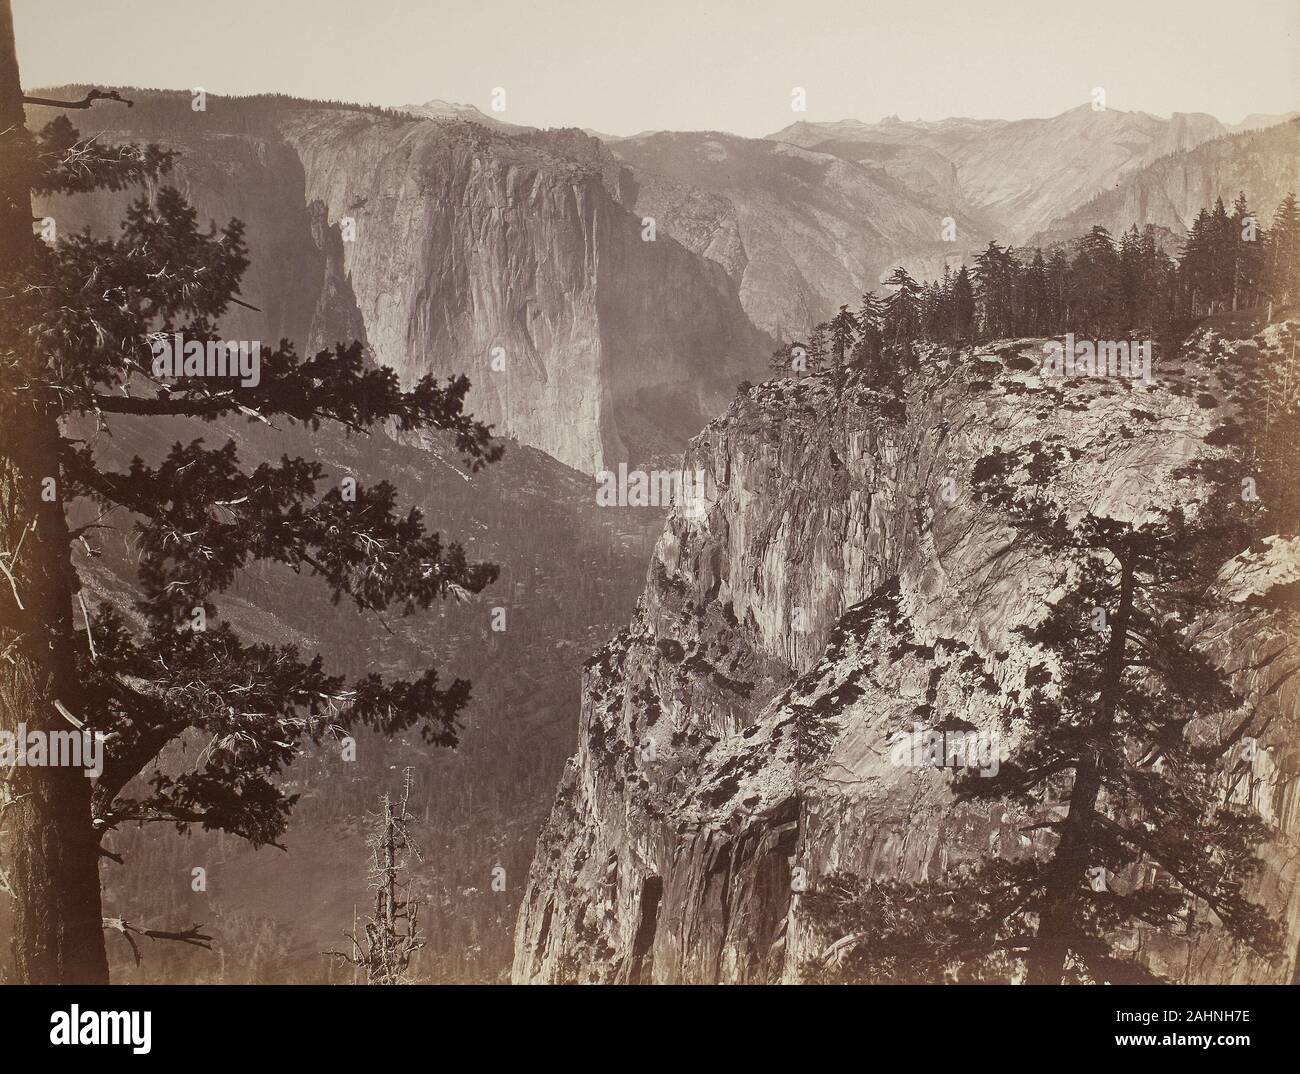 Carleton Watkins. First View of the Yosemite Valley from the Mariposa Trail. 1865–1866. United States. Albumen print In the 1860s, Carleton Watkins was the first to document the untouched wilderness that would become Yosemite National Park. Transporting his fragile equipment on mule or carriage through difficult terrain, Watkins used a mammoth-plate camera whose glass negatives measured up to 18 by 22 inches and yielded remarkably detailed prints of the same size. He favored spectacular compositions with dramatic spatial depth. In this photograph, Watkins depicted Yosemite Valley’s immense spa Stock Photo